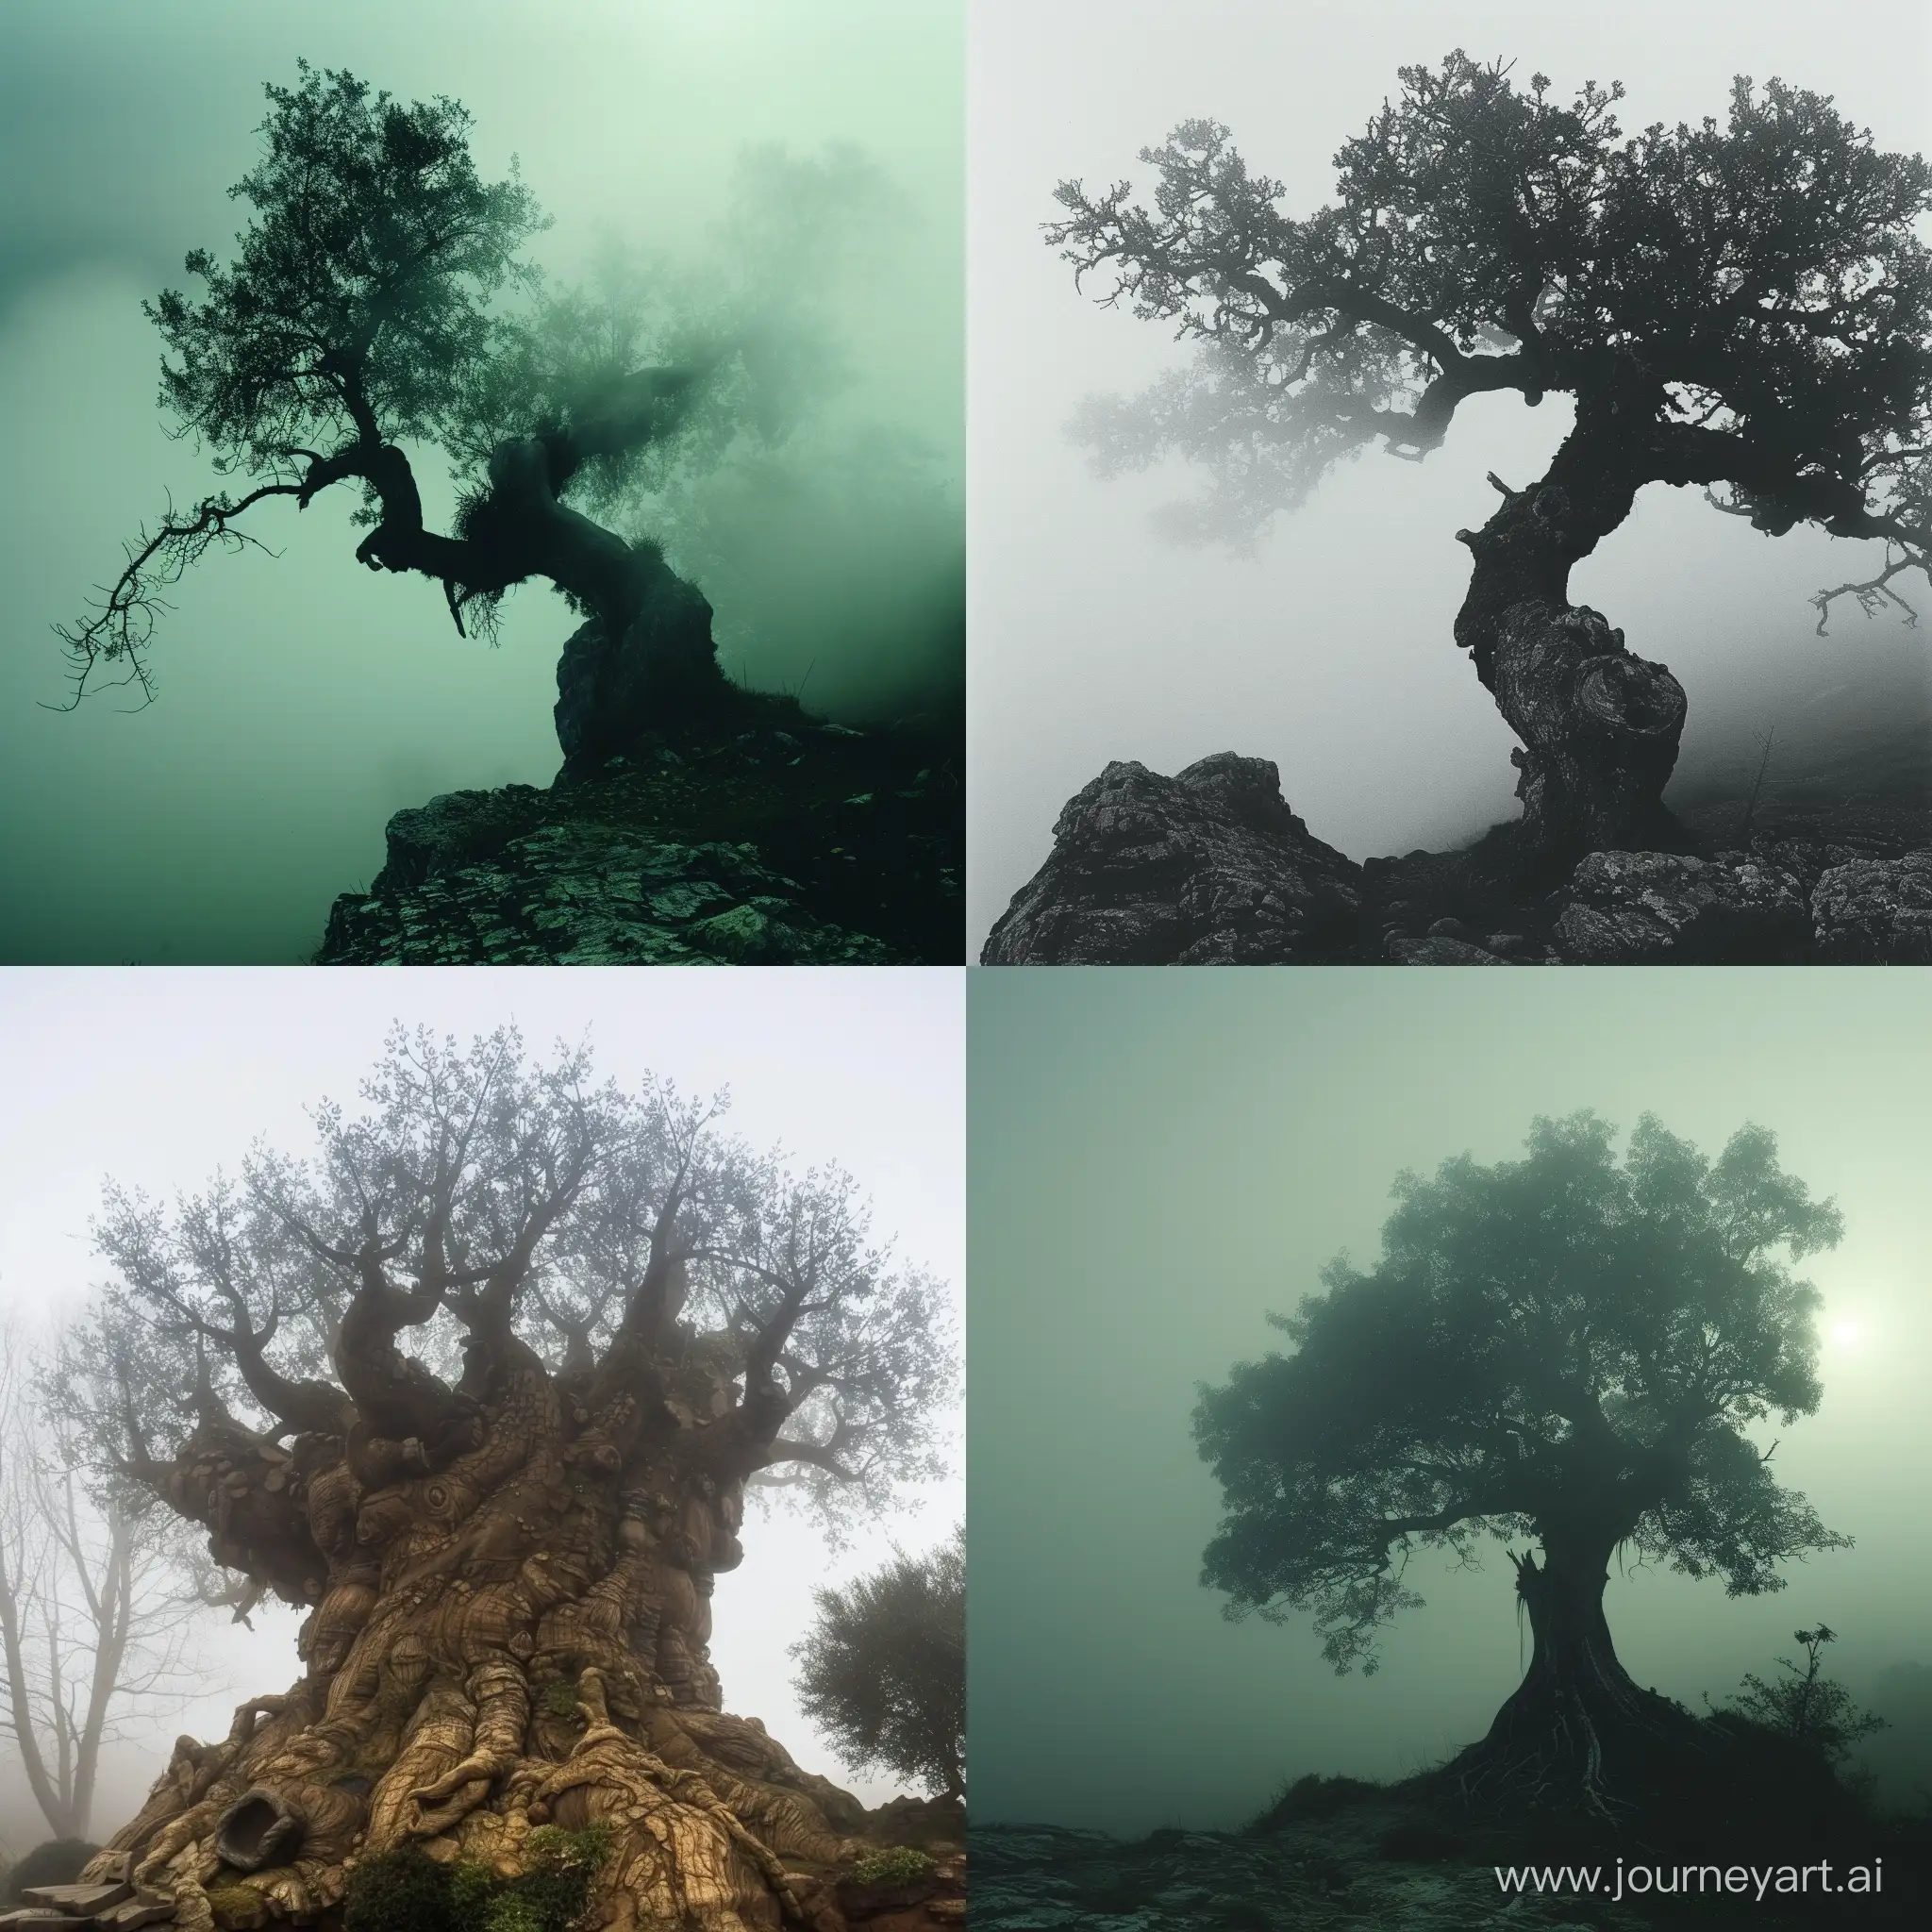 The image of a thousand-year-old tree is foggy.